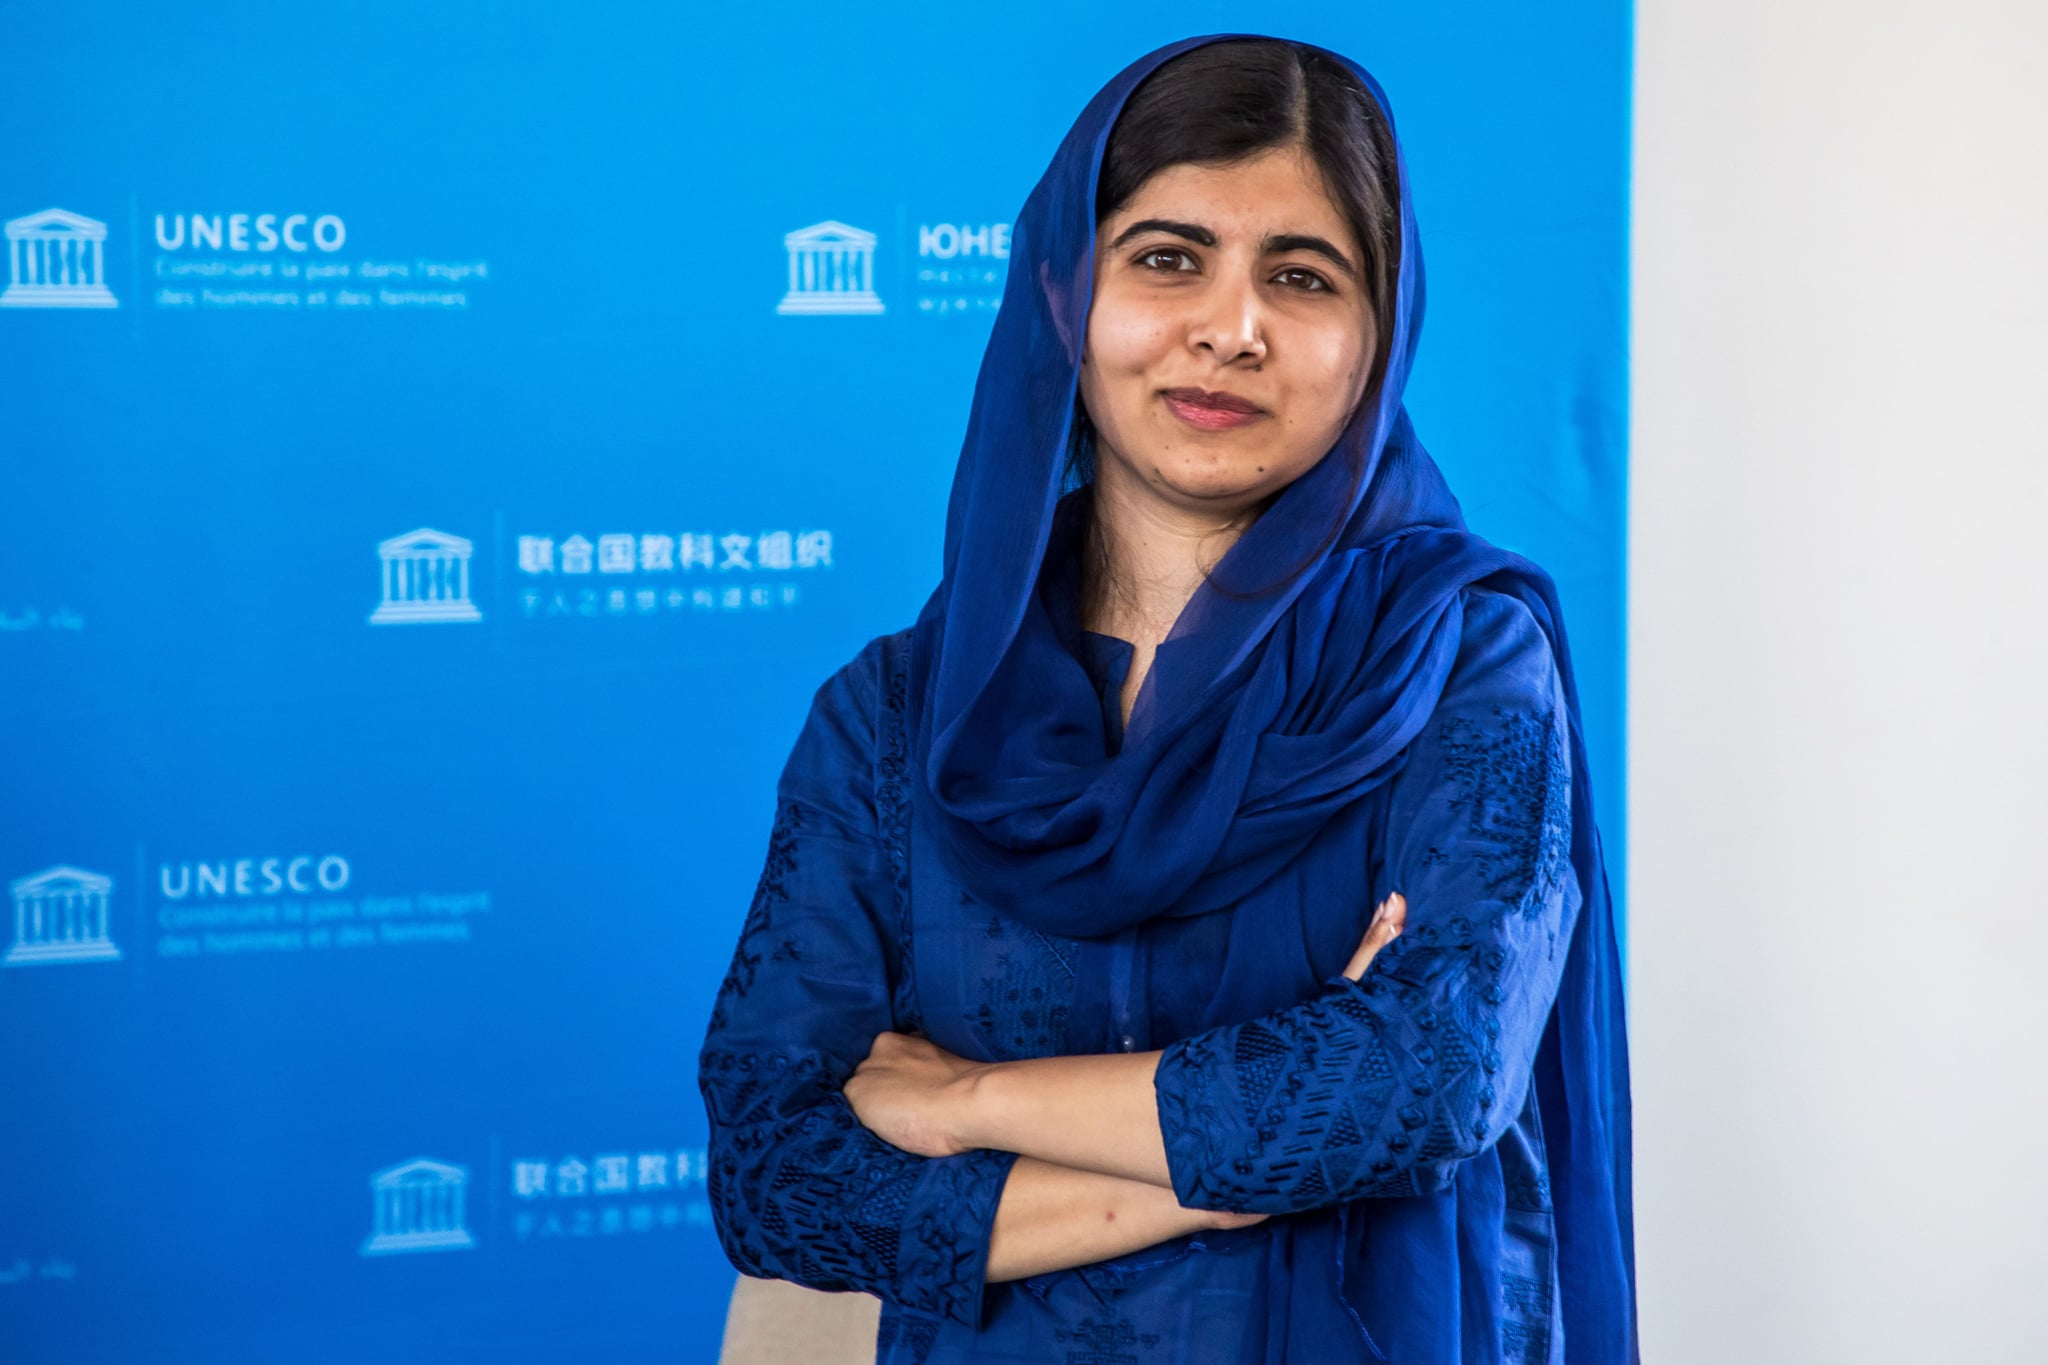 Nobel Peace Prize laureate Malala Yousafzai poses for photo session during the G7 Development and Education Ministers Meeting, in Paris, on July 5, 2019. - France is hosting the rotating presidency of the G7 in 2019. The 45th G7 Summit will be held in August 2019 in Biarritz. (Photo by Christophe PETIT TESSON / POOL / AFP)        (Photo credit should read CHRISTOPHE PETIT TESSON/AFP via Getty Images)